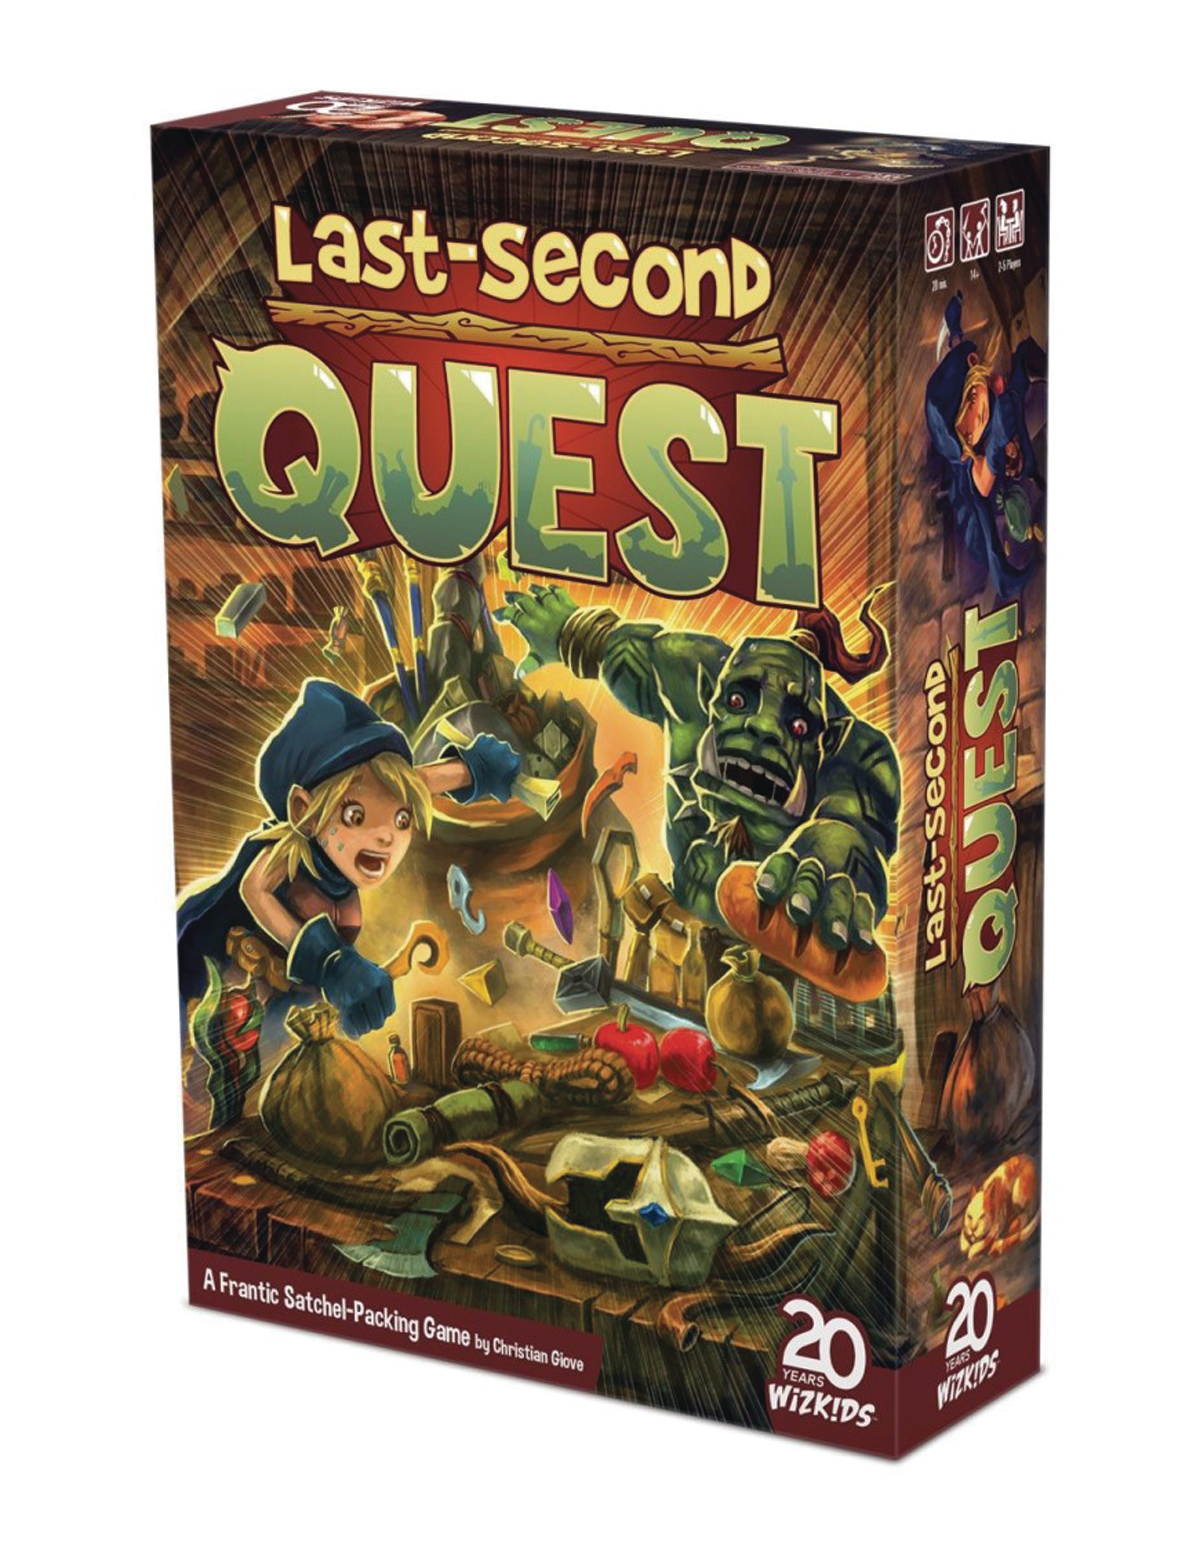 Last Second Quest Board Game